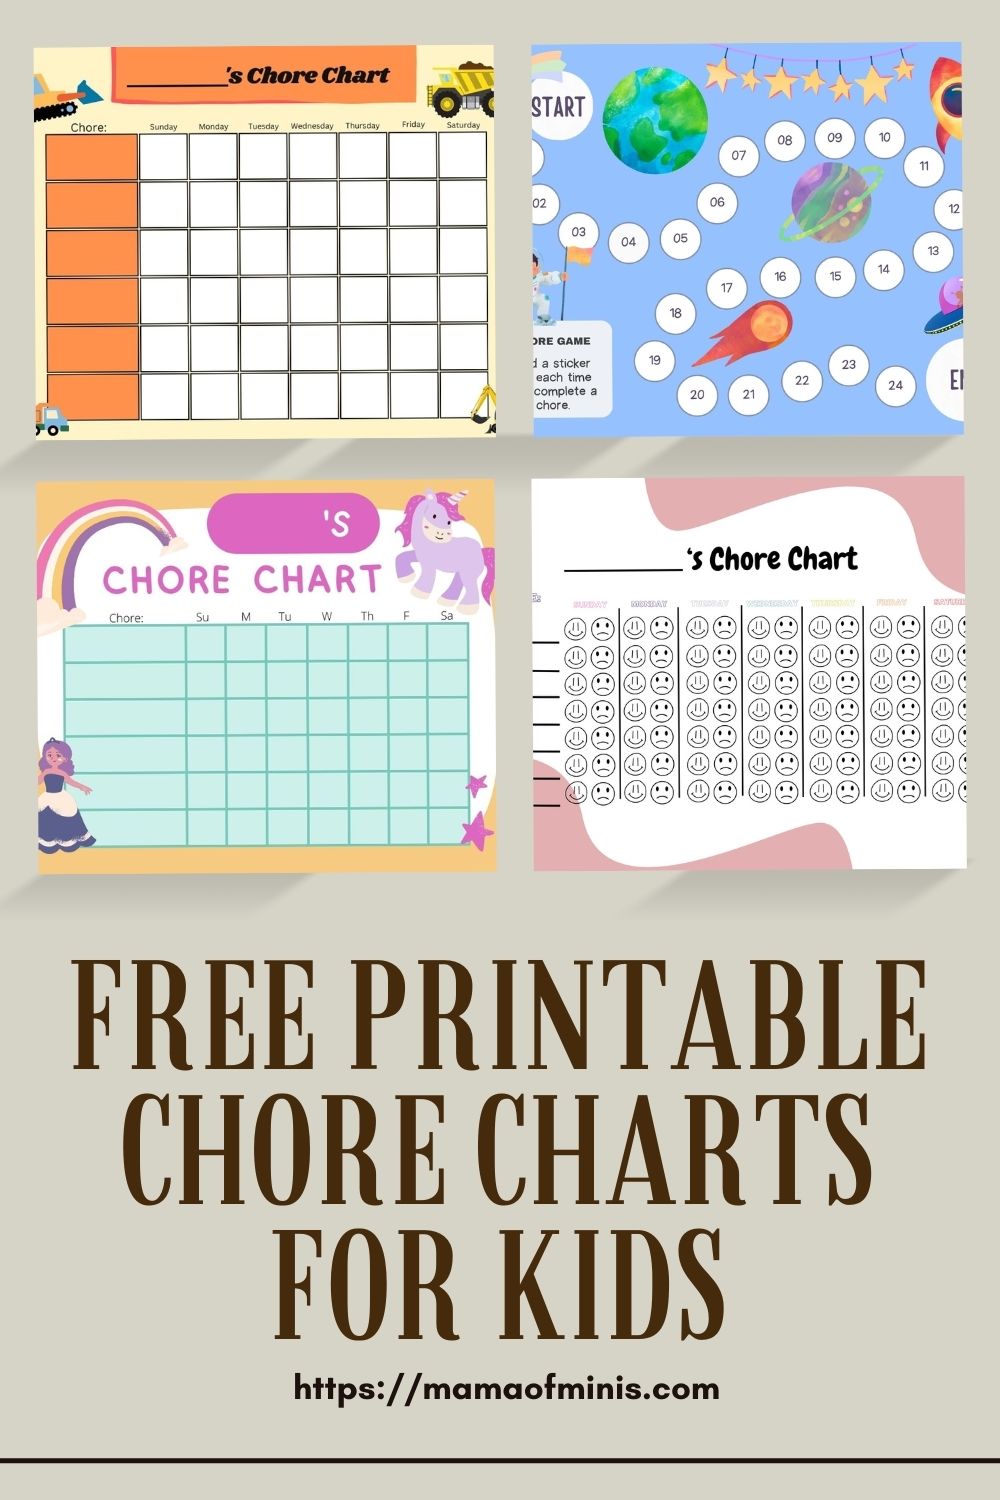 Free Printable Chore Charts for Kids 